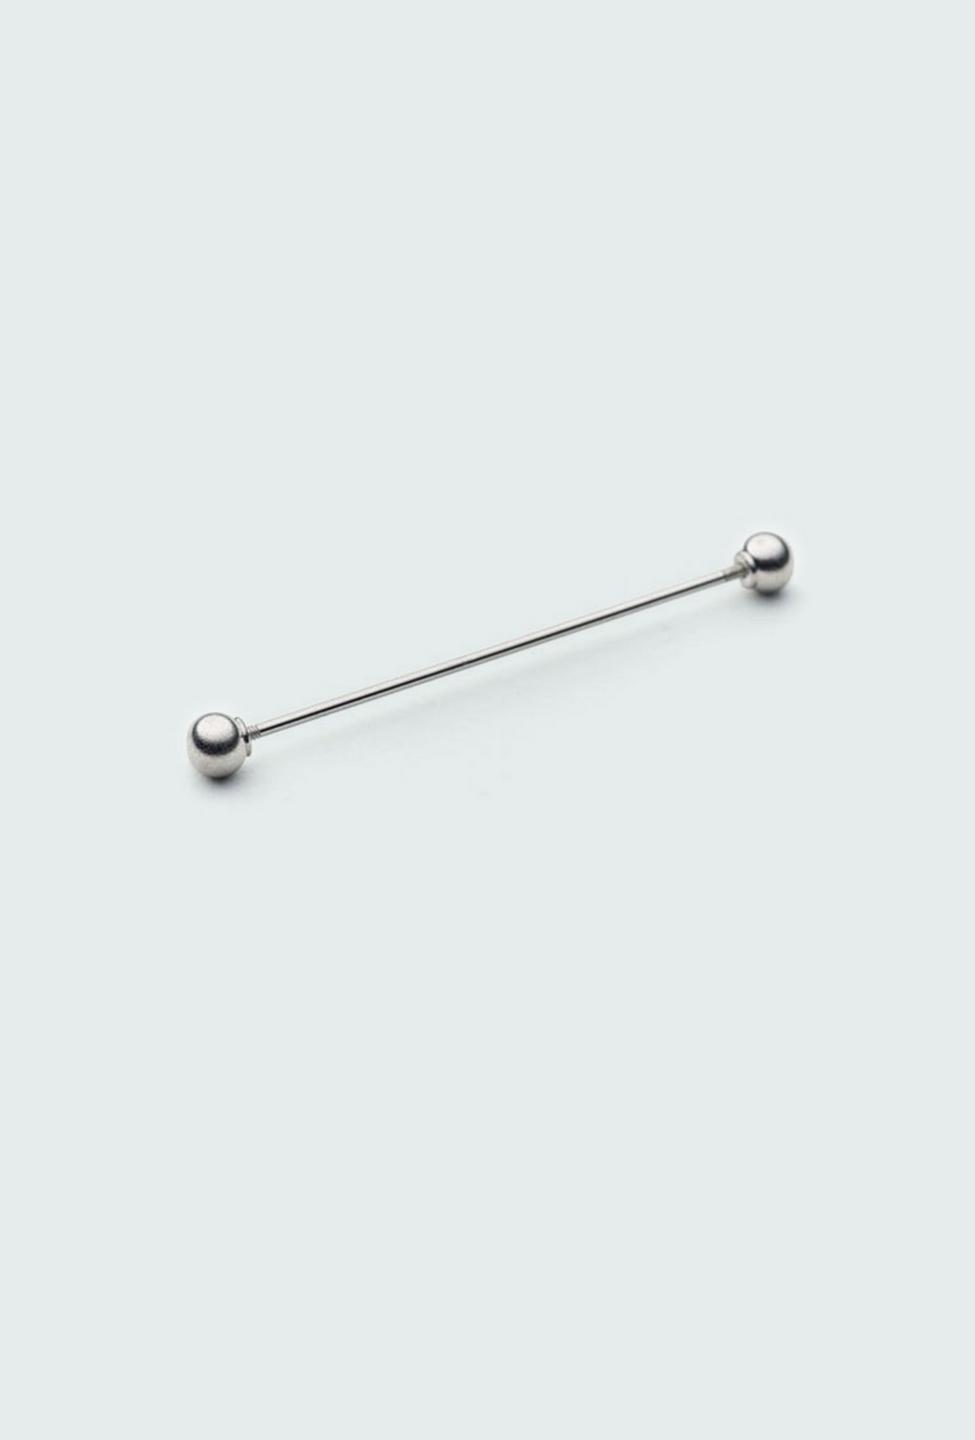 Silver tie clip - Solid Design from Indochino Collection